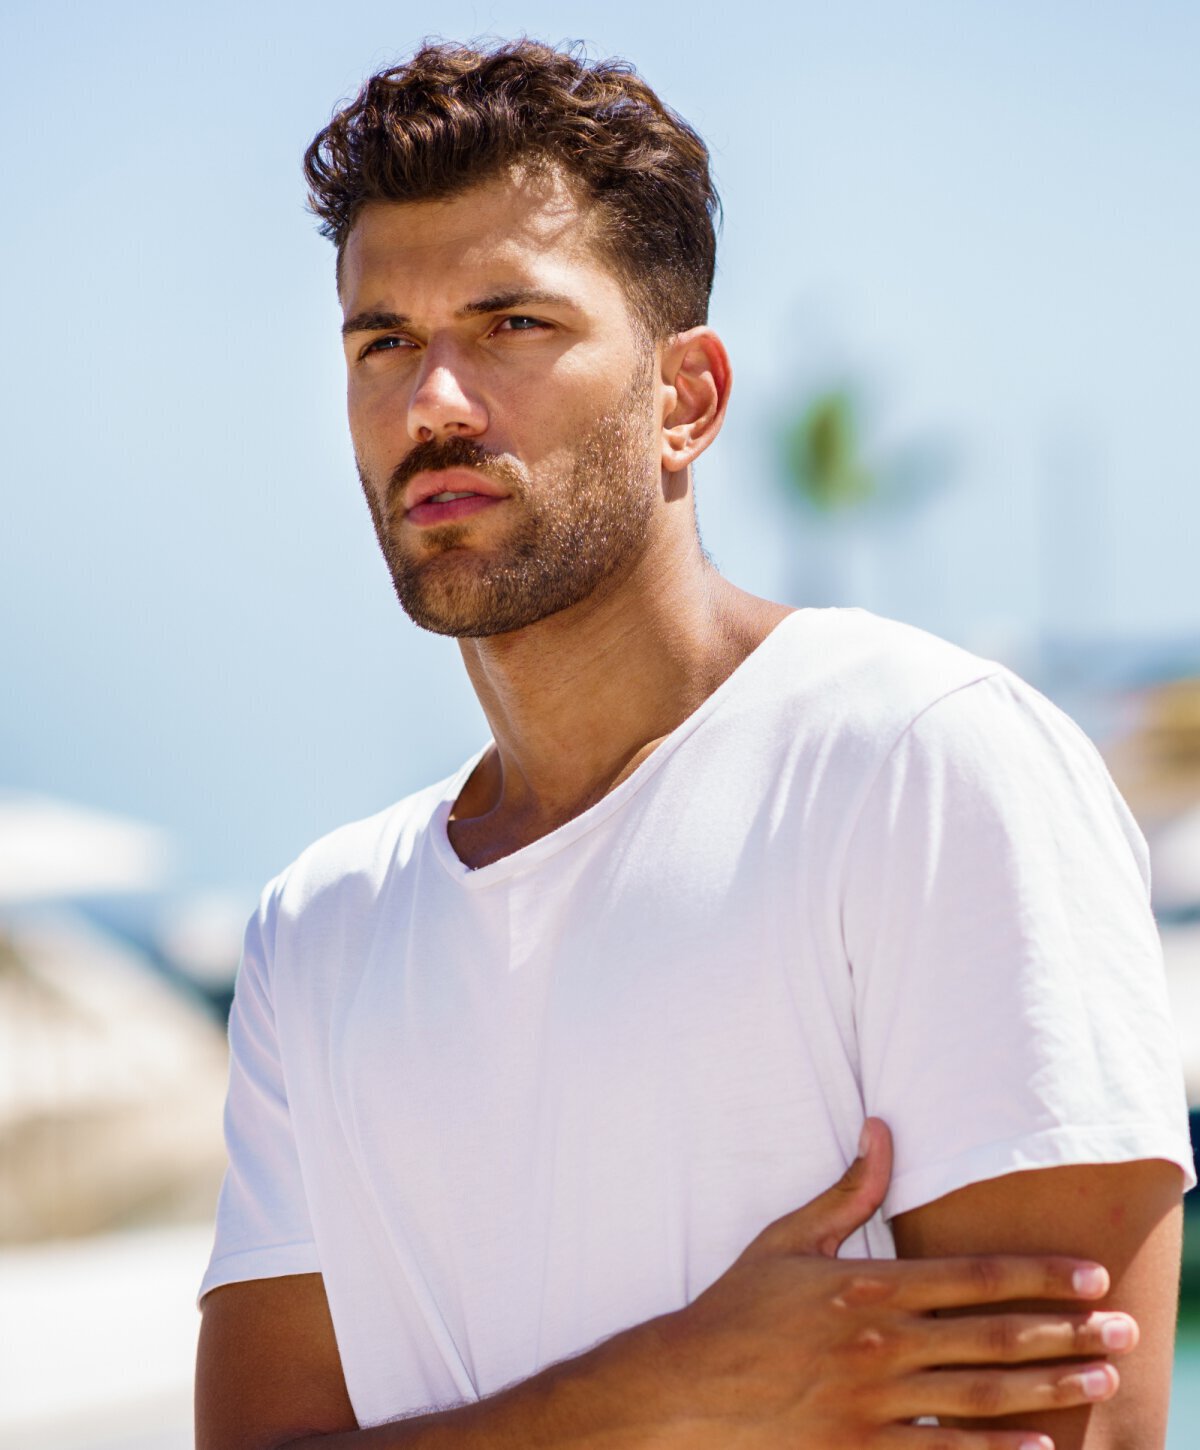 New Jersey Gynecomastia Surgery model in a white shirt